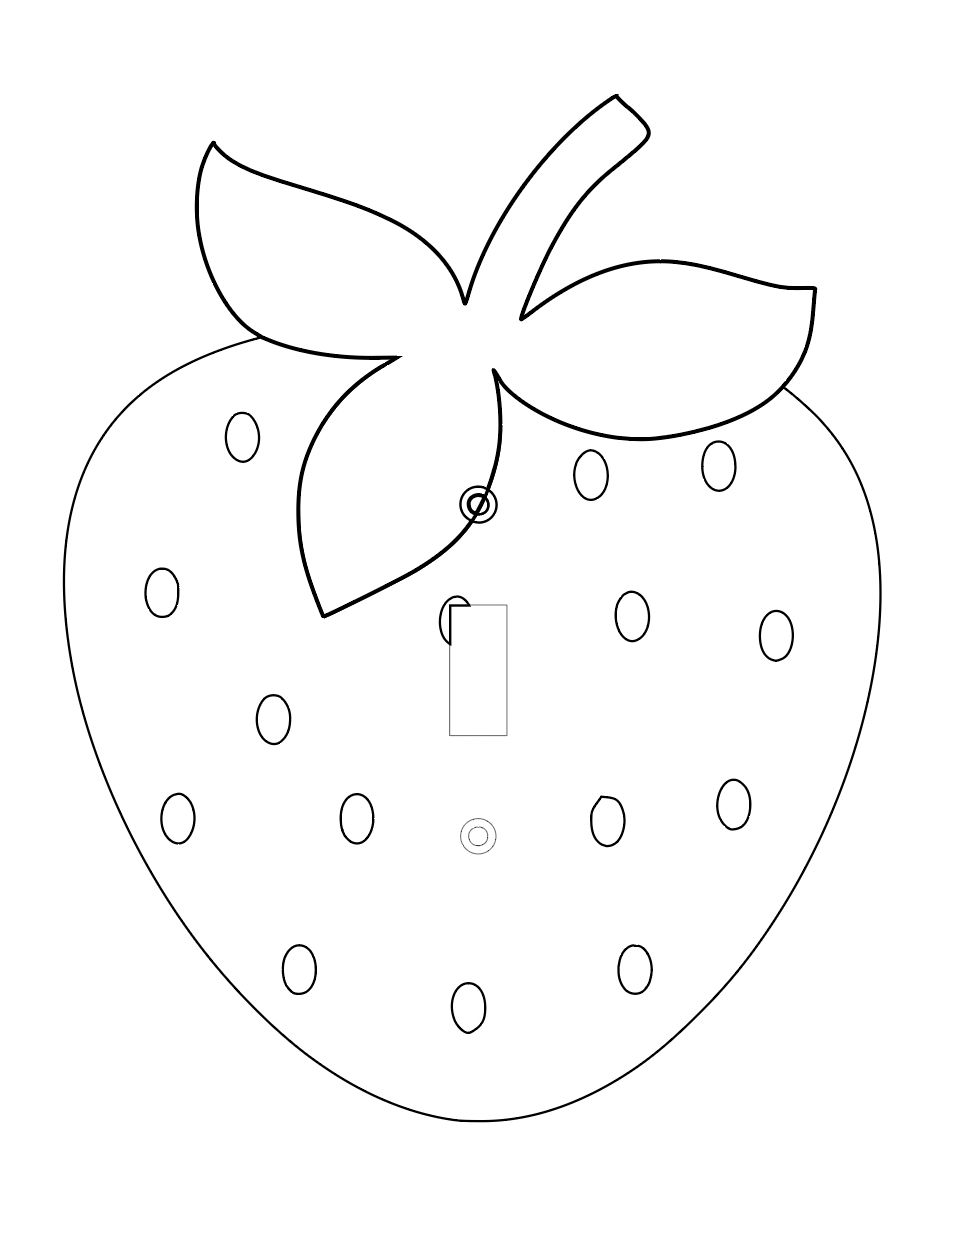 Strawberry Light-switch Cover